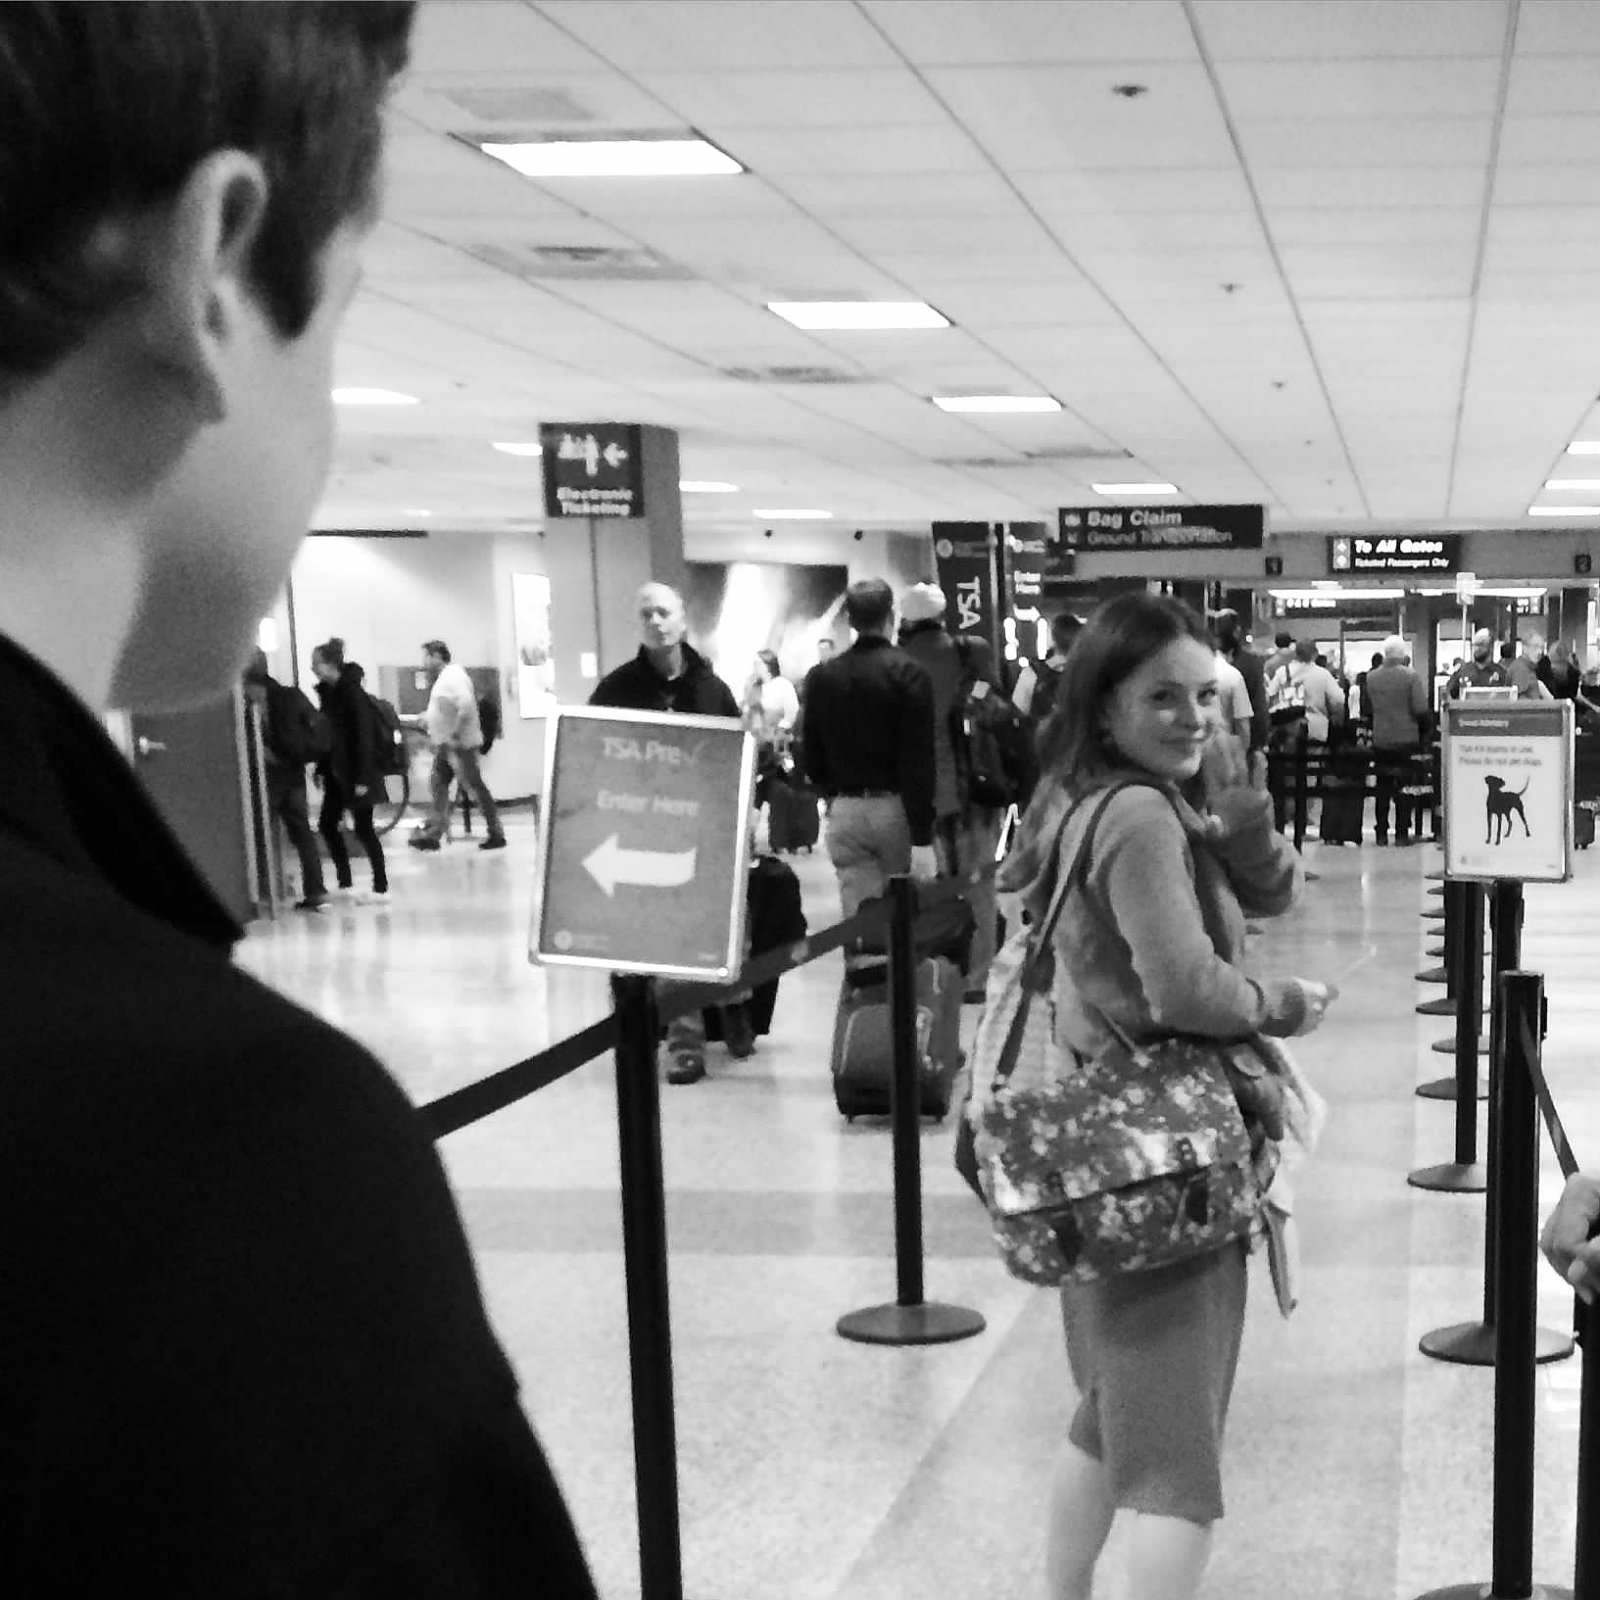 A girl is looking back at the camera and smiling as she enters the TSA line at the airport.